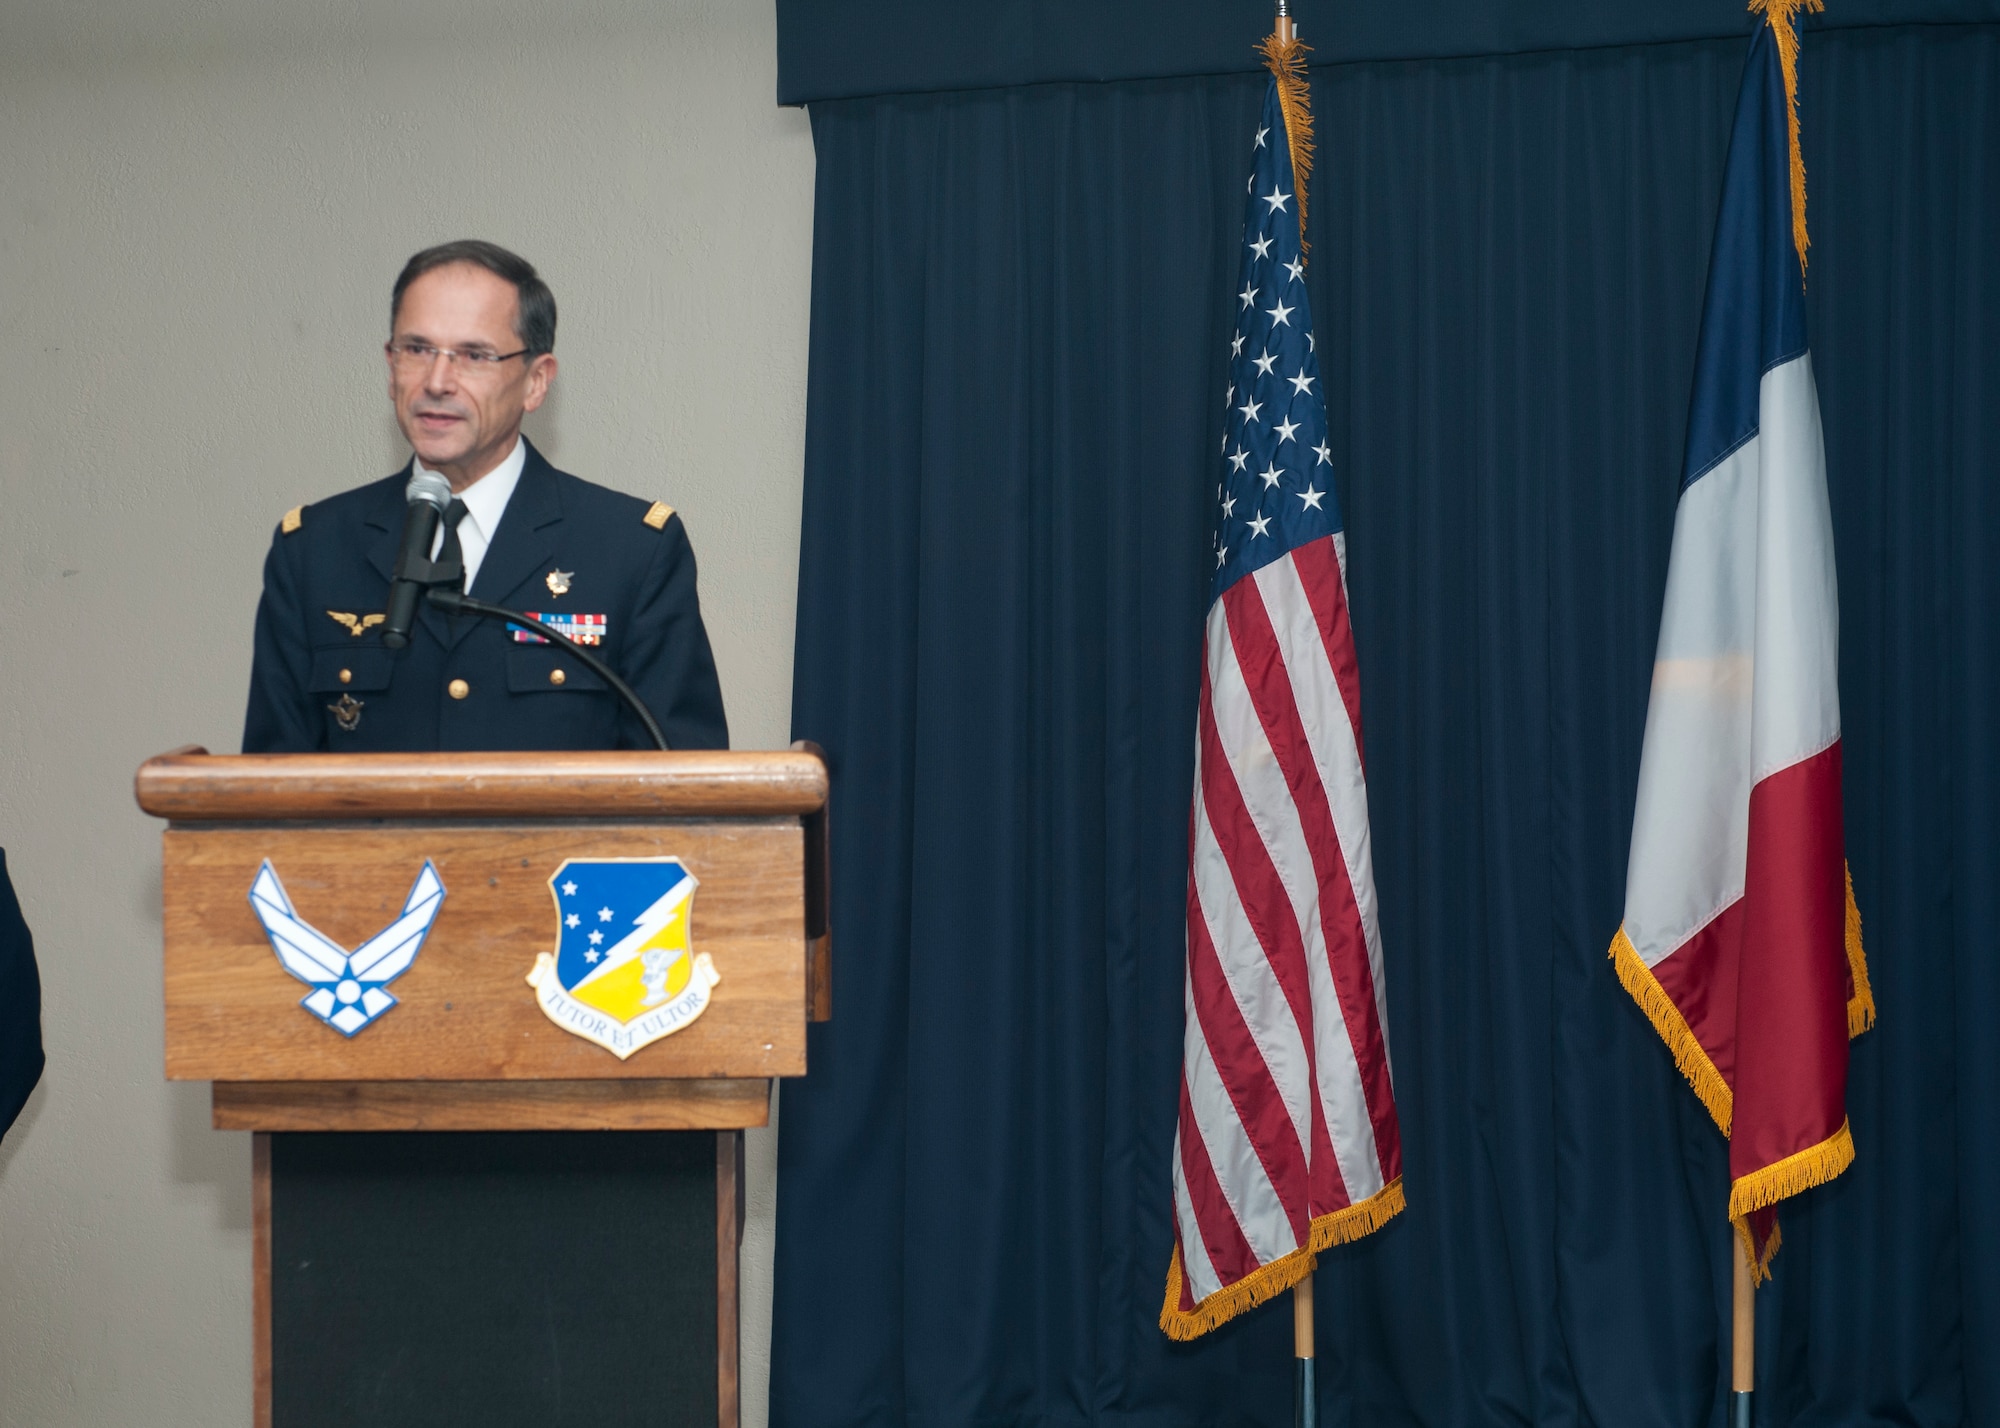 Lt. General Antoine Creux, French air force deputy chief of staff, delivers a closing speech at the MQ-9 Reaper graduation ceremony at Holloman Air Force Base, N.M., Nov. 26. The French air force worked in collaboration with Holloman AFB to graduate six student pilots and sensor operators from the 16th Training Squadron.  The students became the first-ever French air force members to learn the MQ-9 Reaper system, and their landmark graduation will mark the beginning of future coalition efforts between France and the U.S. to better utilize Remotely Piloted Aircraft across the world. Creux visited Holloman AFB both to take part in the graduation ceremony, and to tour Holloman AFB’s MQ-9 training facilities. (U.S. Air Force phot by Airman 1st Class Daniel E. Liddicoet)

